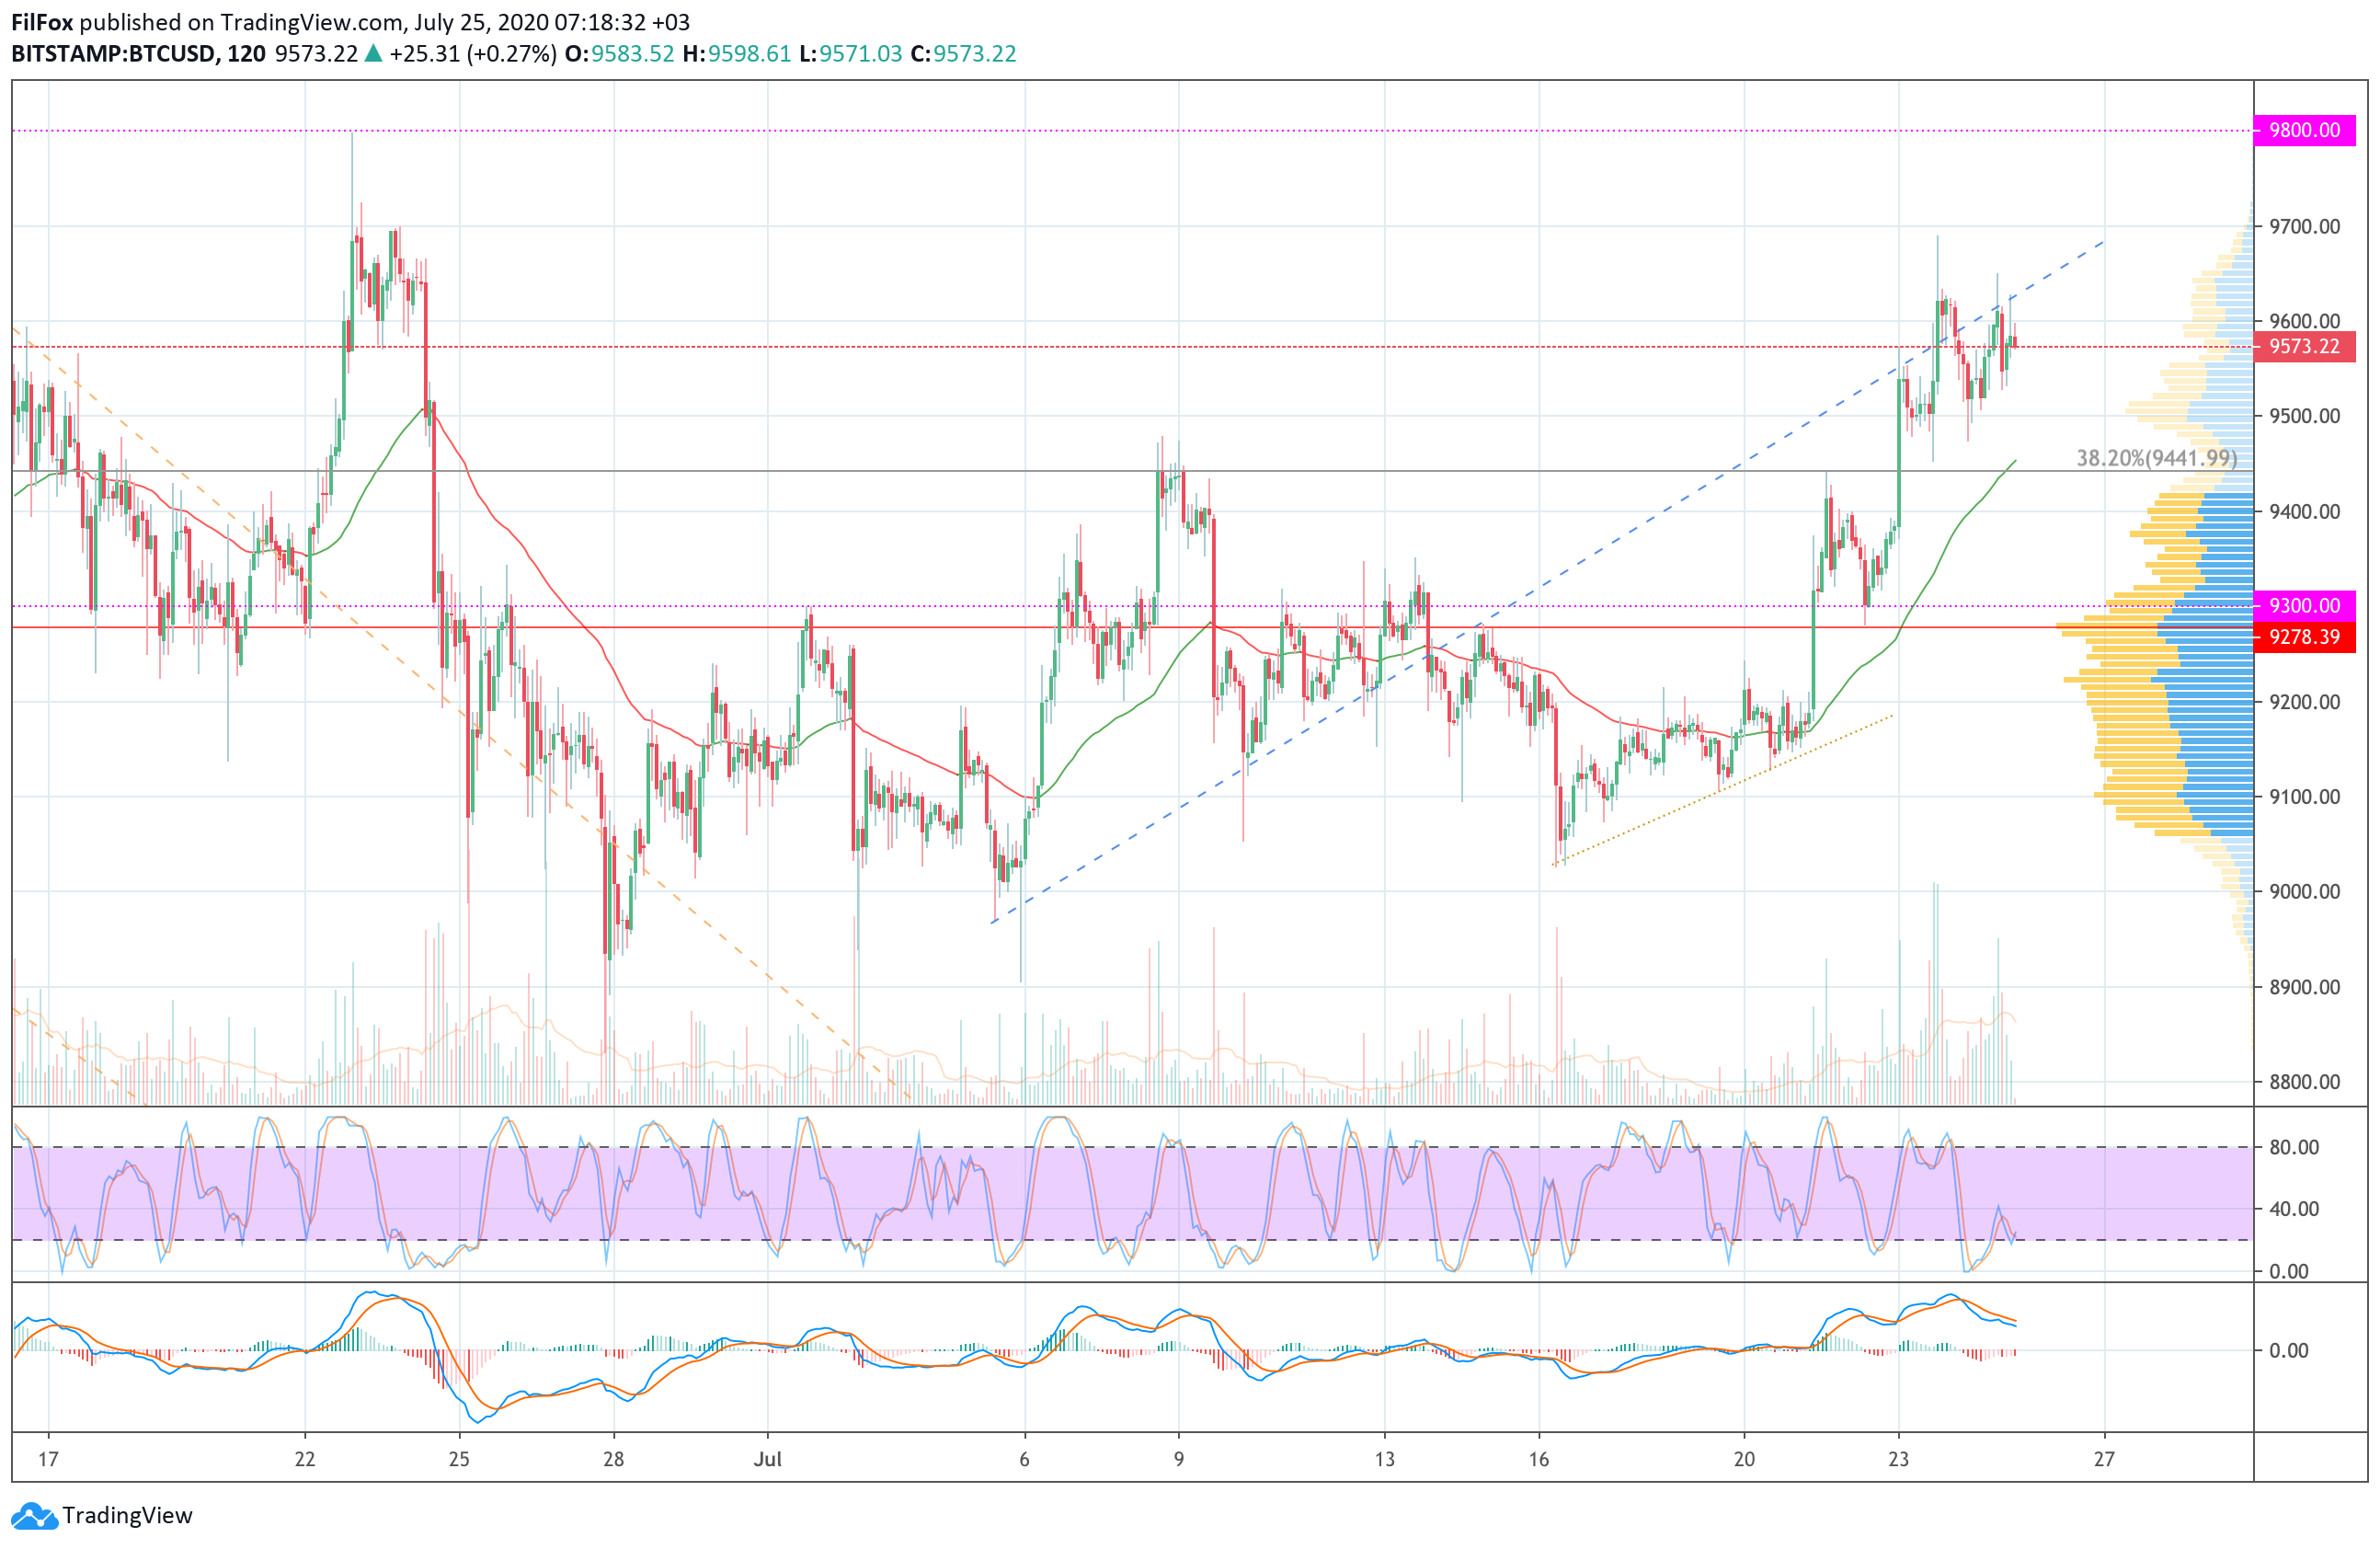 Analysis of prices for Bitcoin, Ethereum, XRP for 07/25/2020